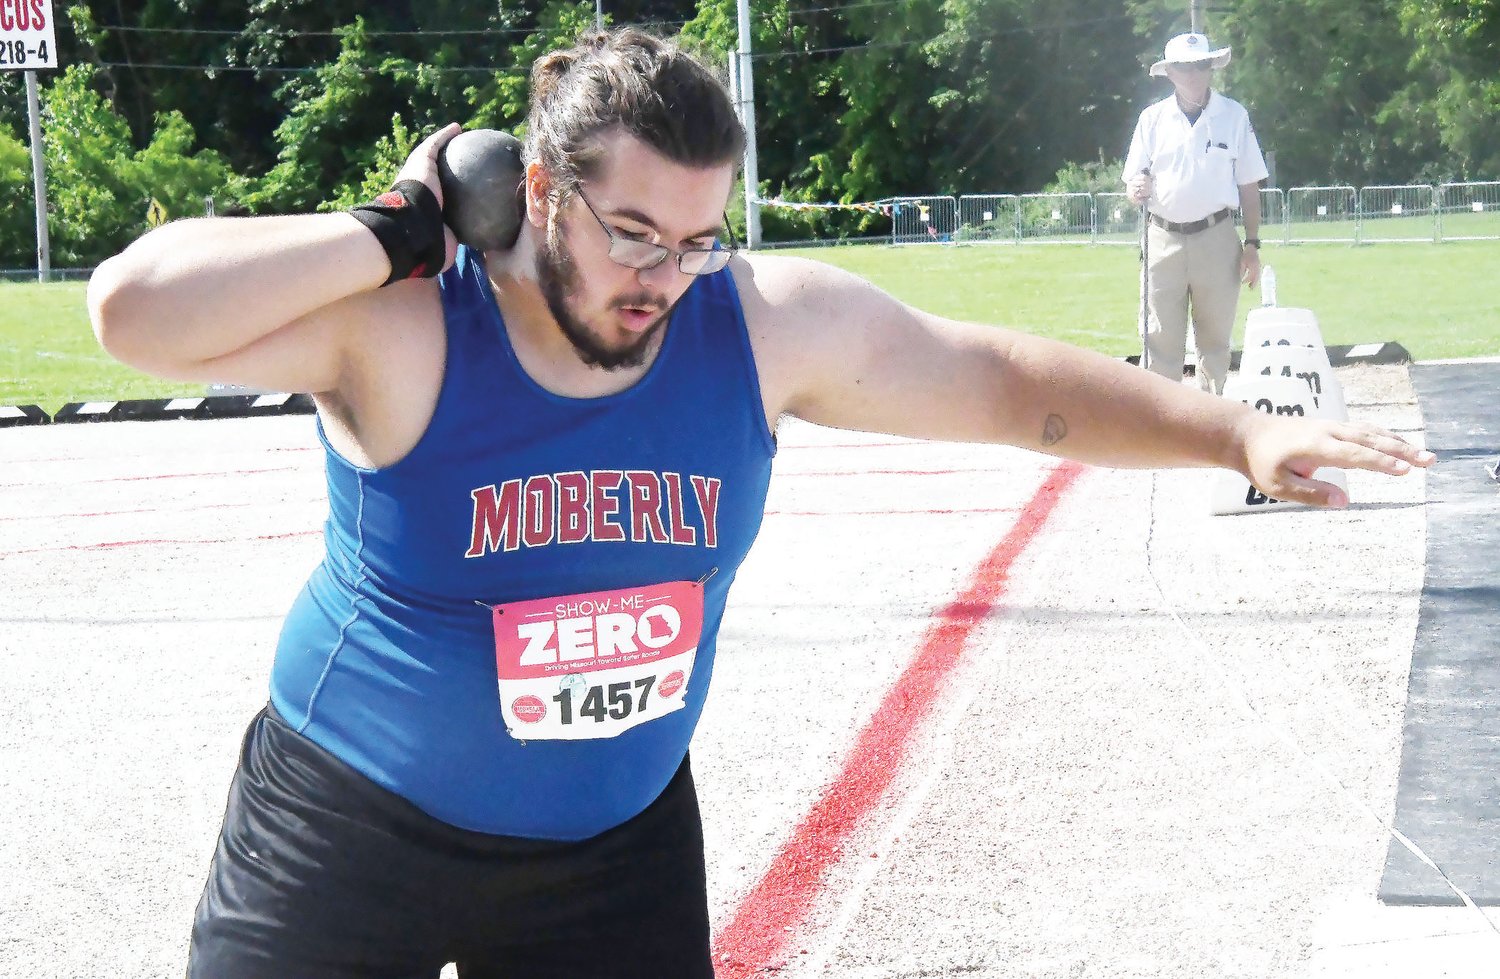 Rick Huff begins to spin during a shot put attempt at the Missouri Class 4 state meet Saturday morning in Jefferson City. Huff placed 12th overall with a mark of 13.83 meters (45-feet, 4½ inches).